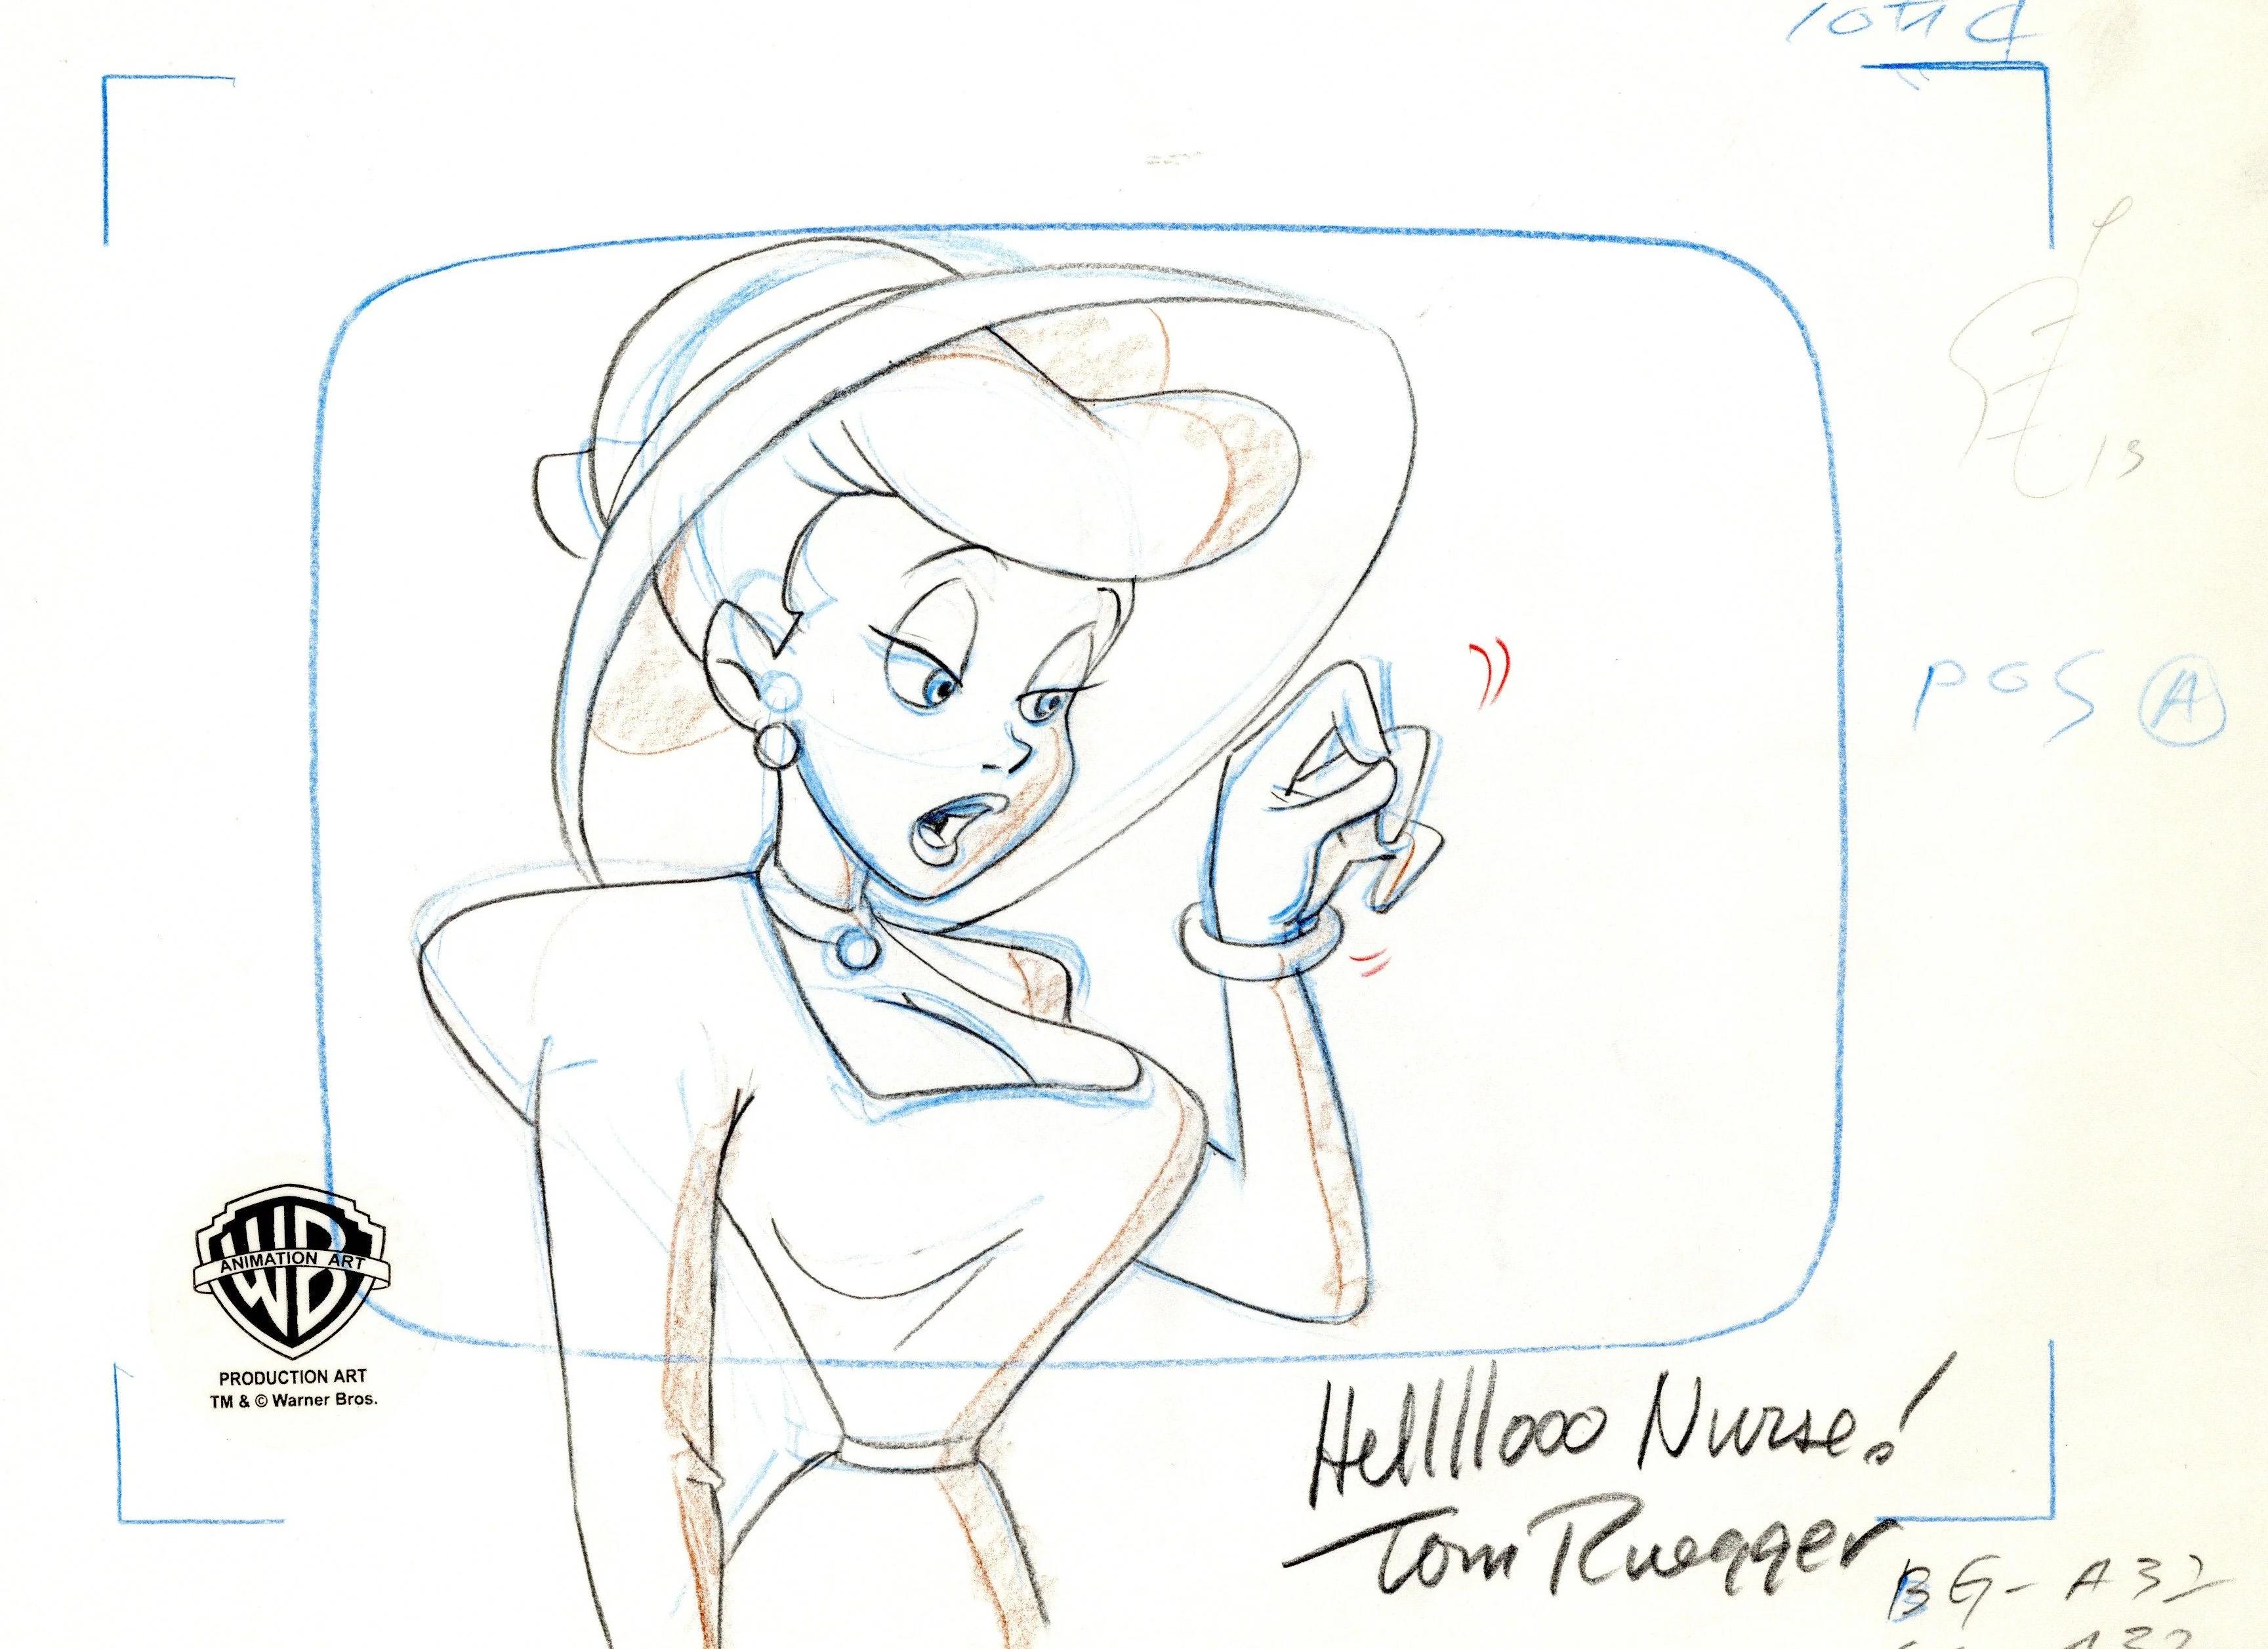 Animaniacs Original Production Layout Drawing Signed by Tom Ruegger: Hello Nurse - Art by Warner Bros. Studio Artists